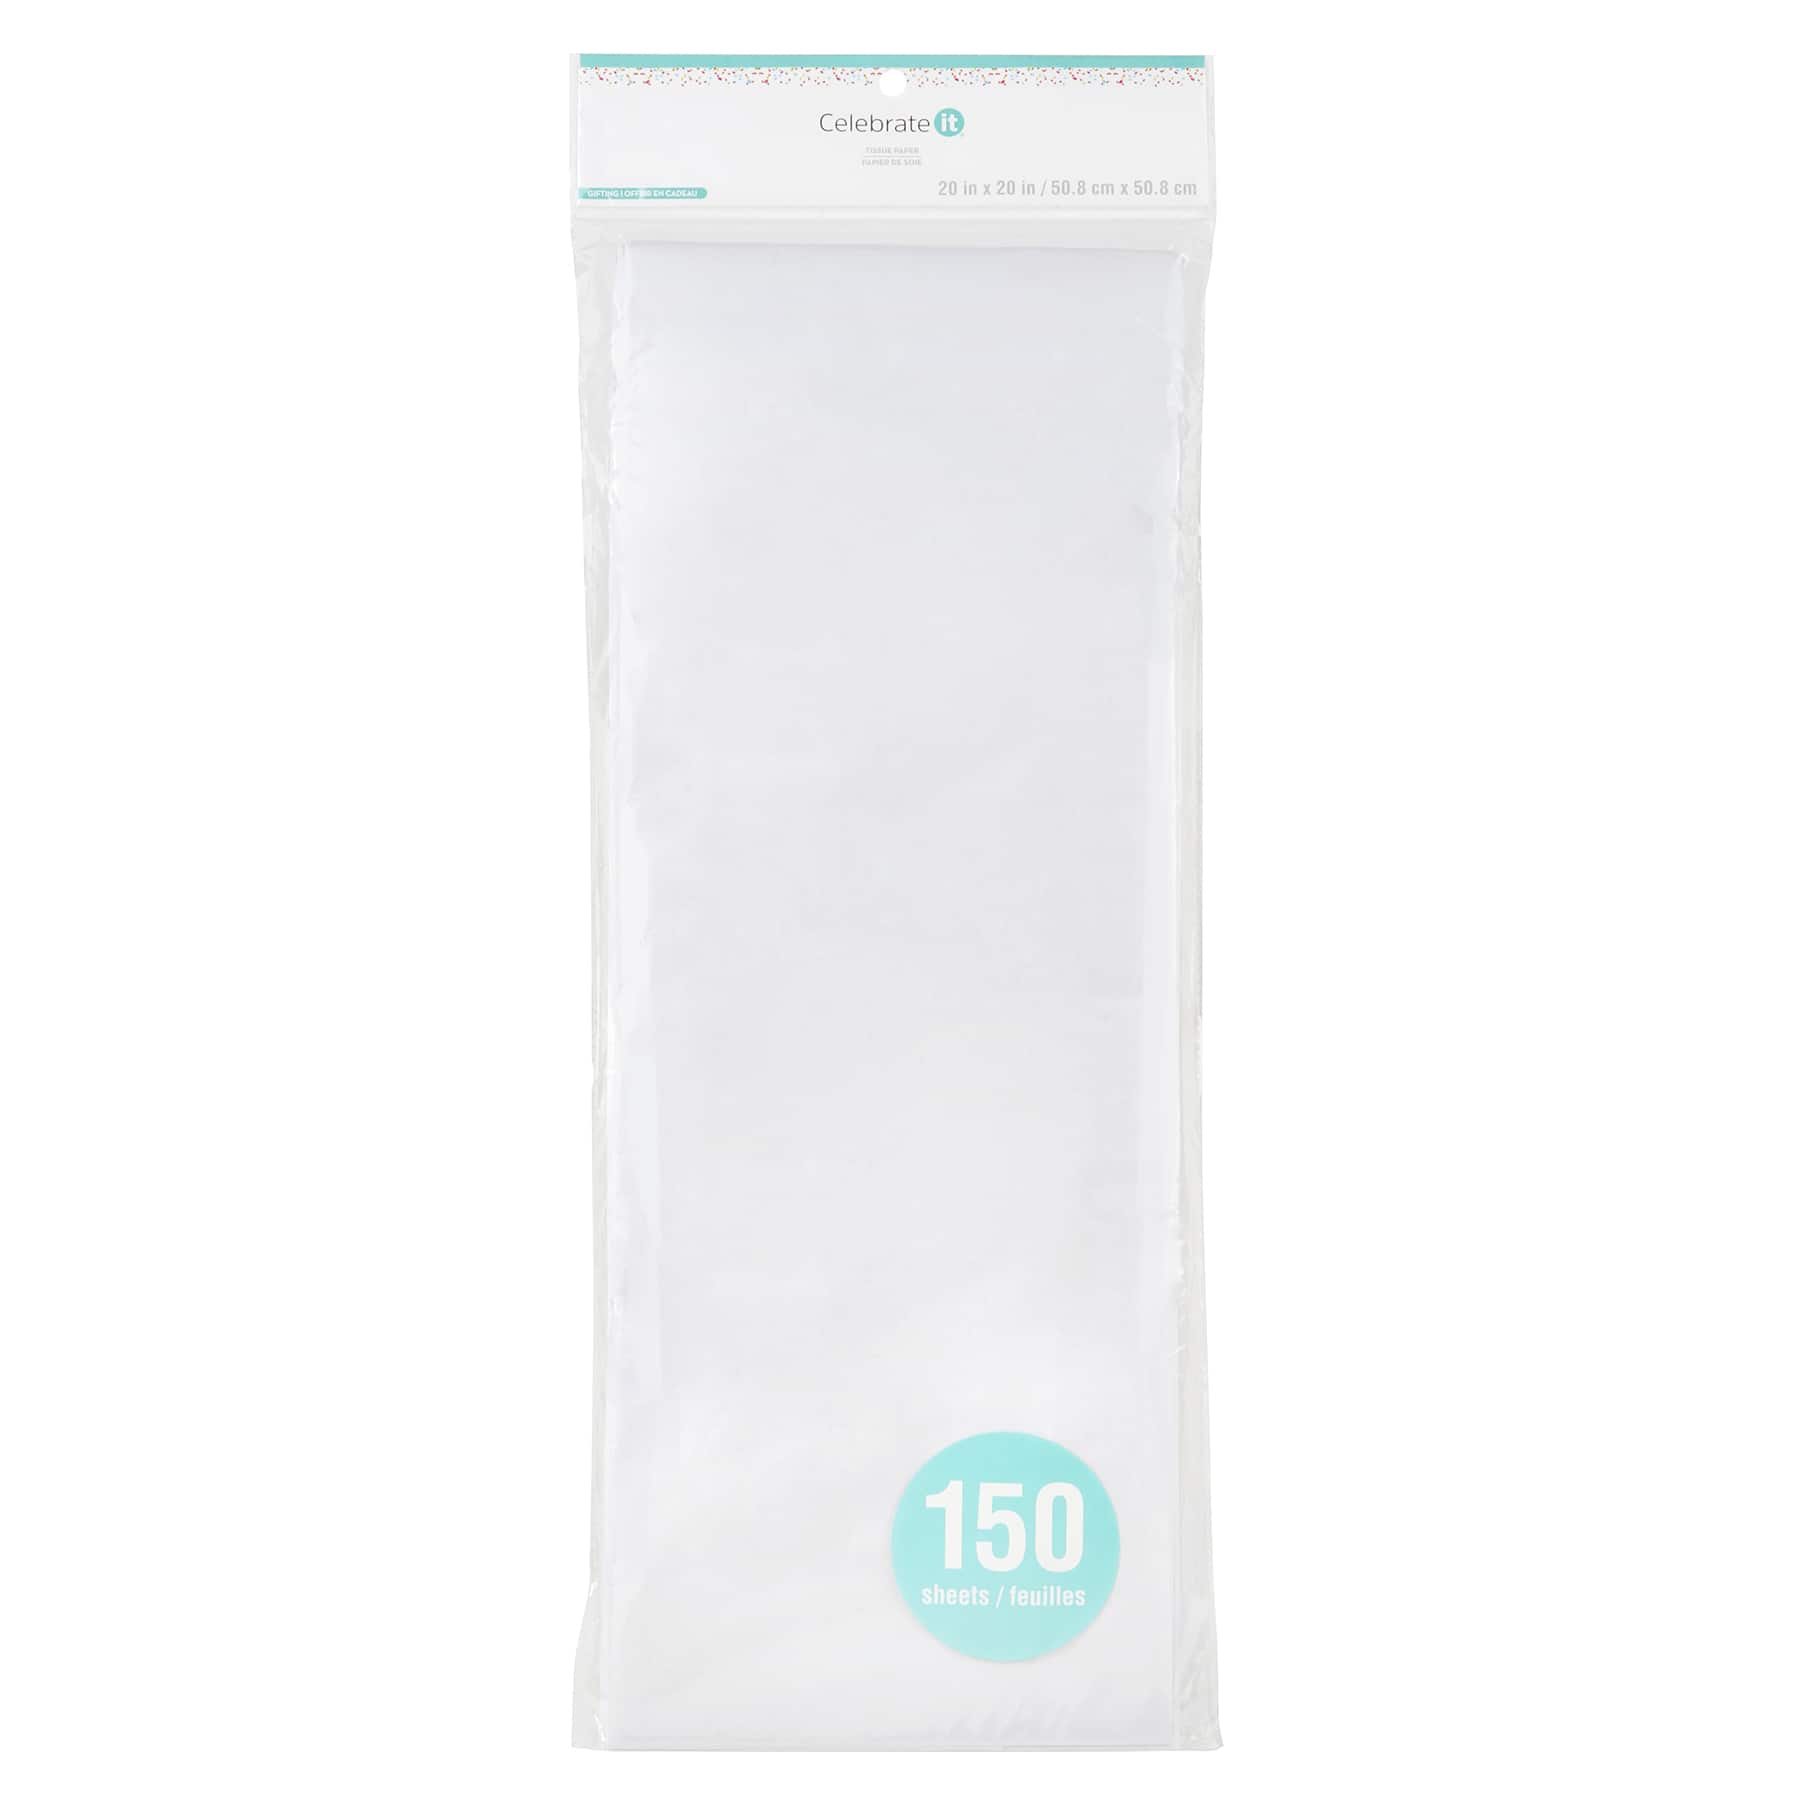 Paper Shred by Celebrate It 4 oz in White | Michaels